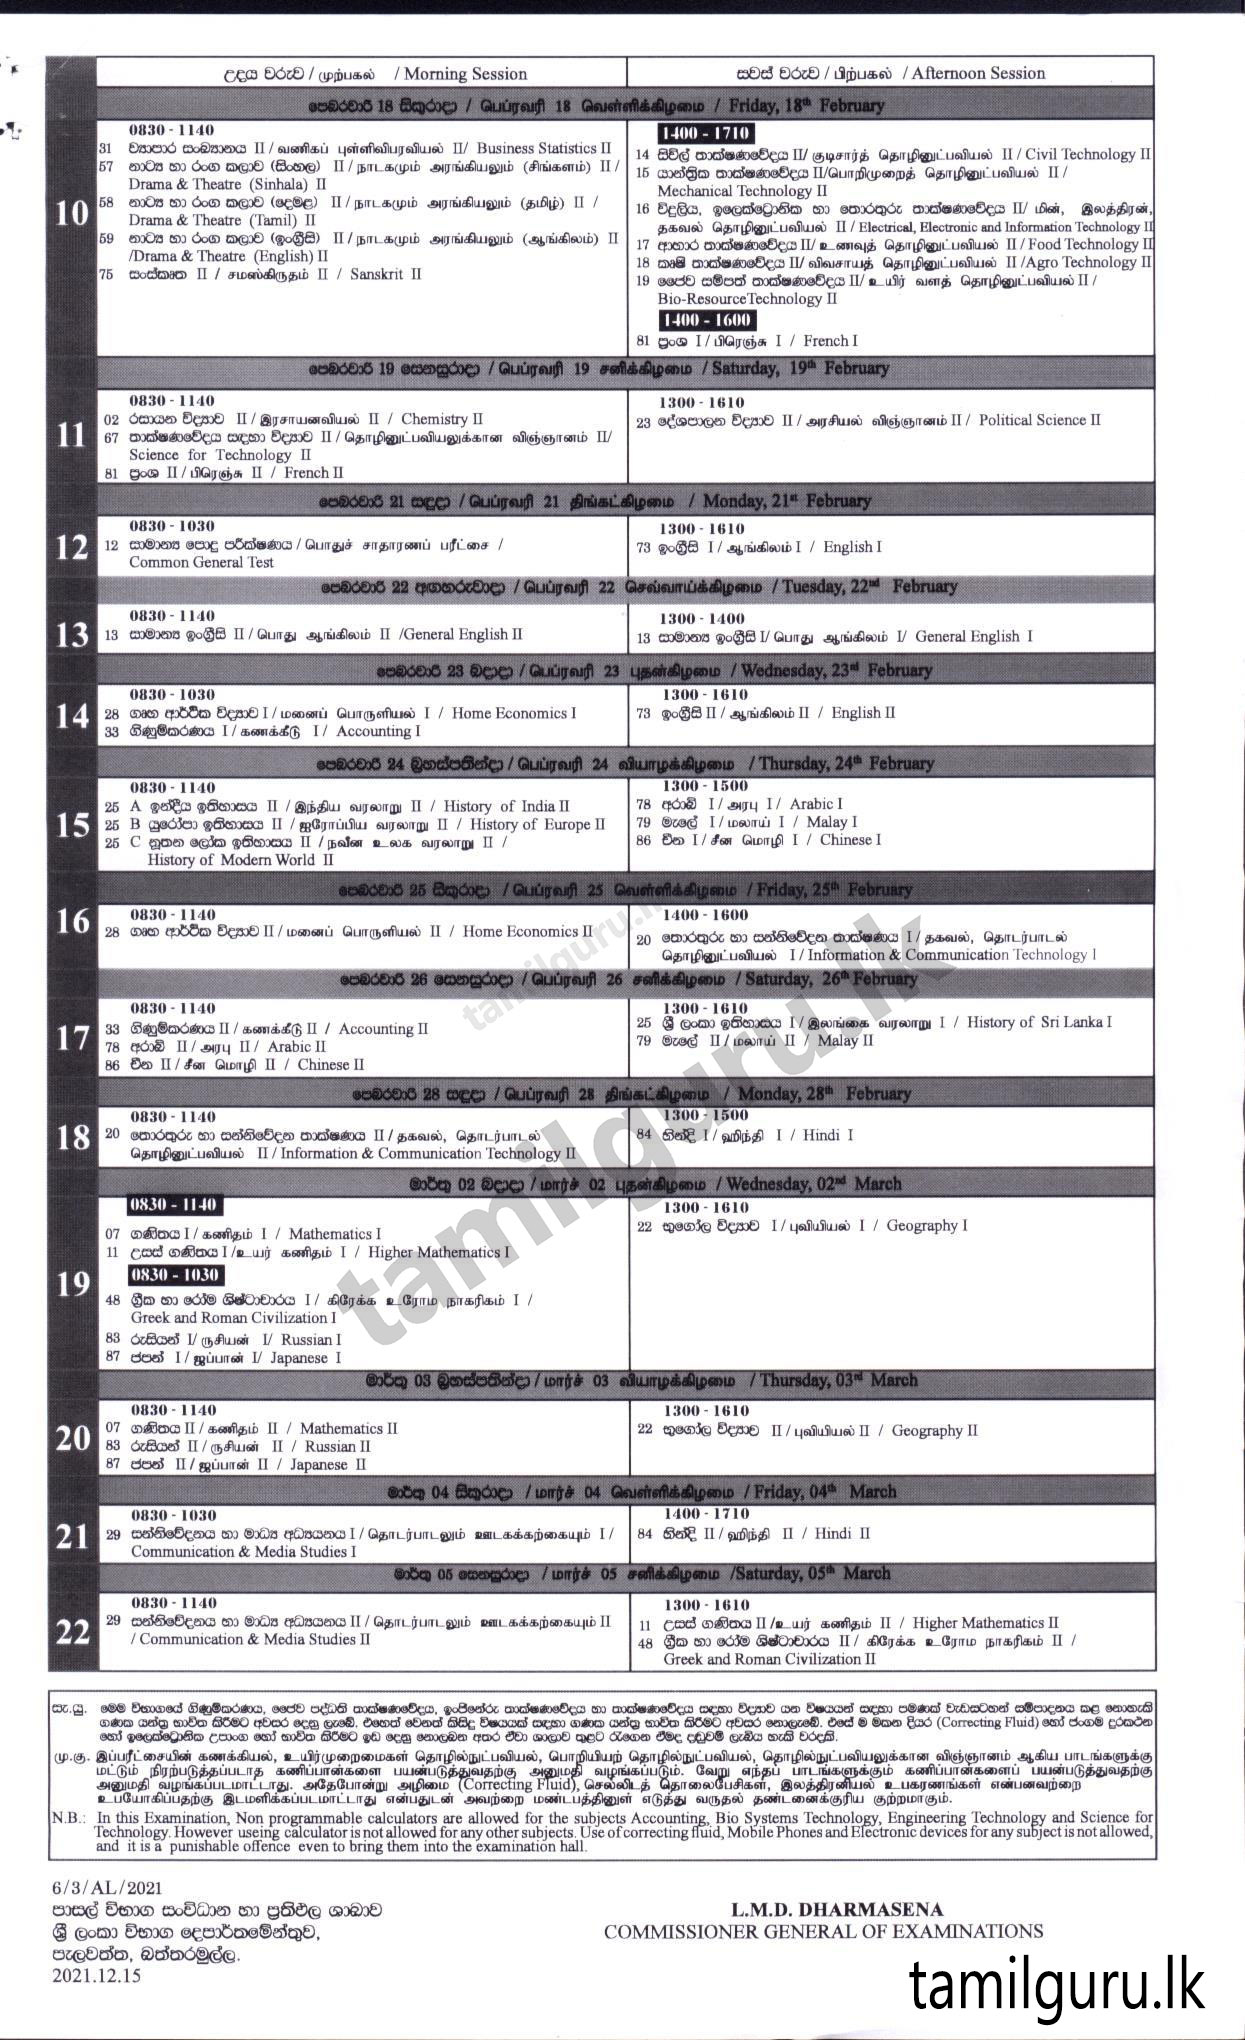 Download GCE A/L Time Table 2021(2022) in Sinhala, Tamil & English (PDF) - Department of Examinations - www.doenets.lk